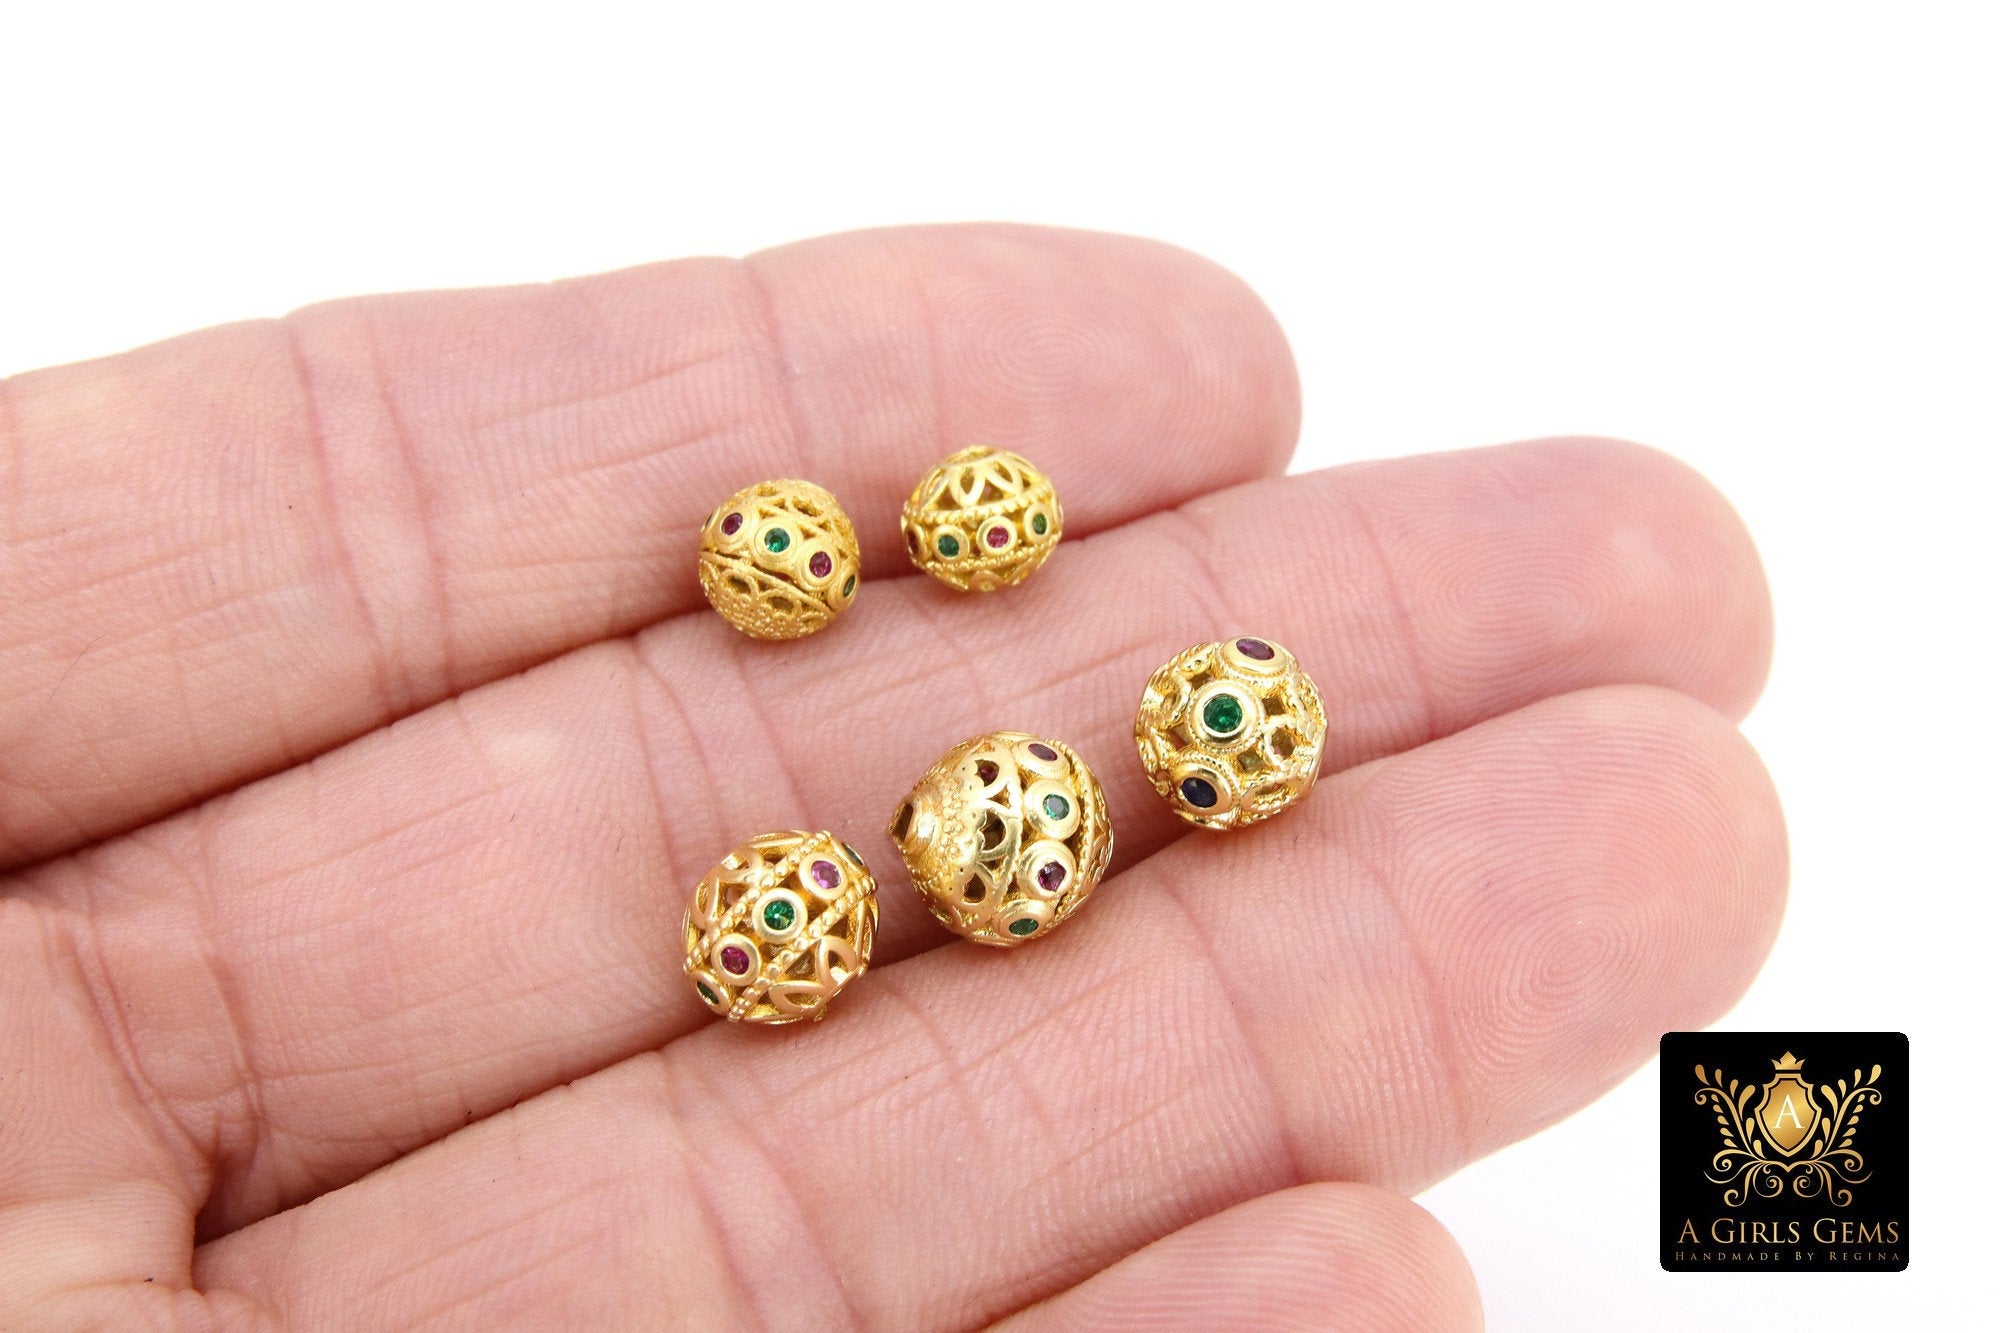 CZ Pave Gold Round Filigree Beads, 2 Pc Patterned Silver Metal Beads AG #3336,0 Round High Quality 8 mm Focal Beads, Jewelry Findings